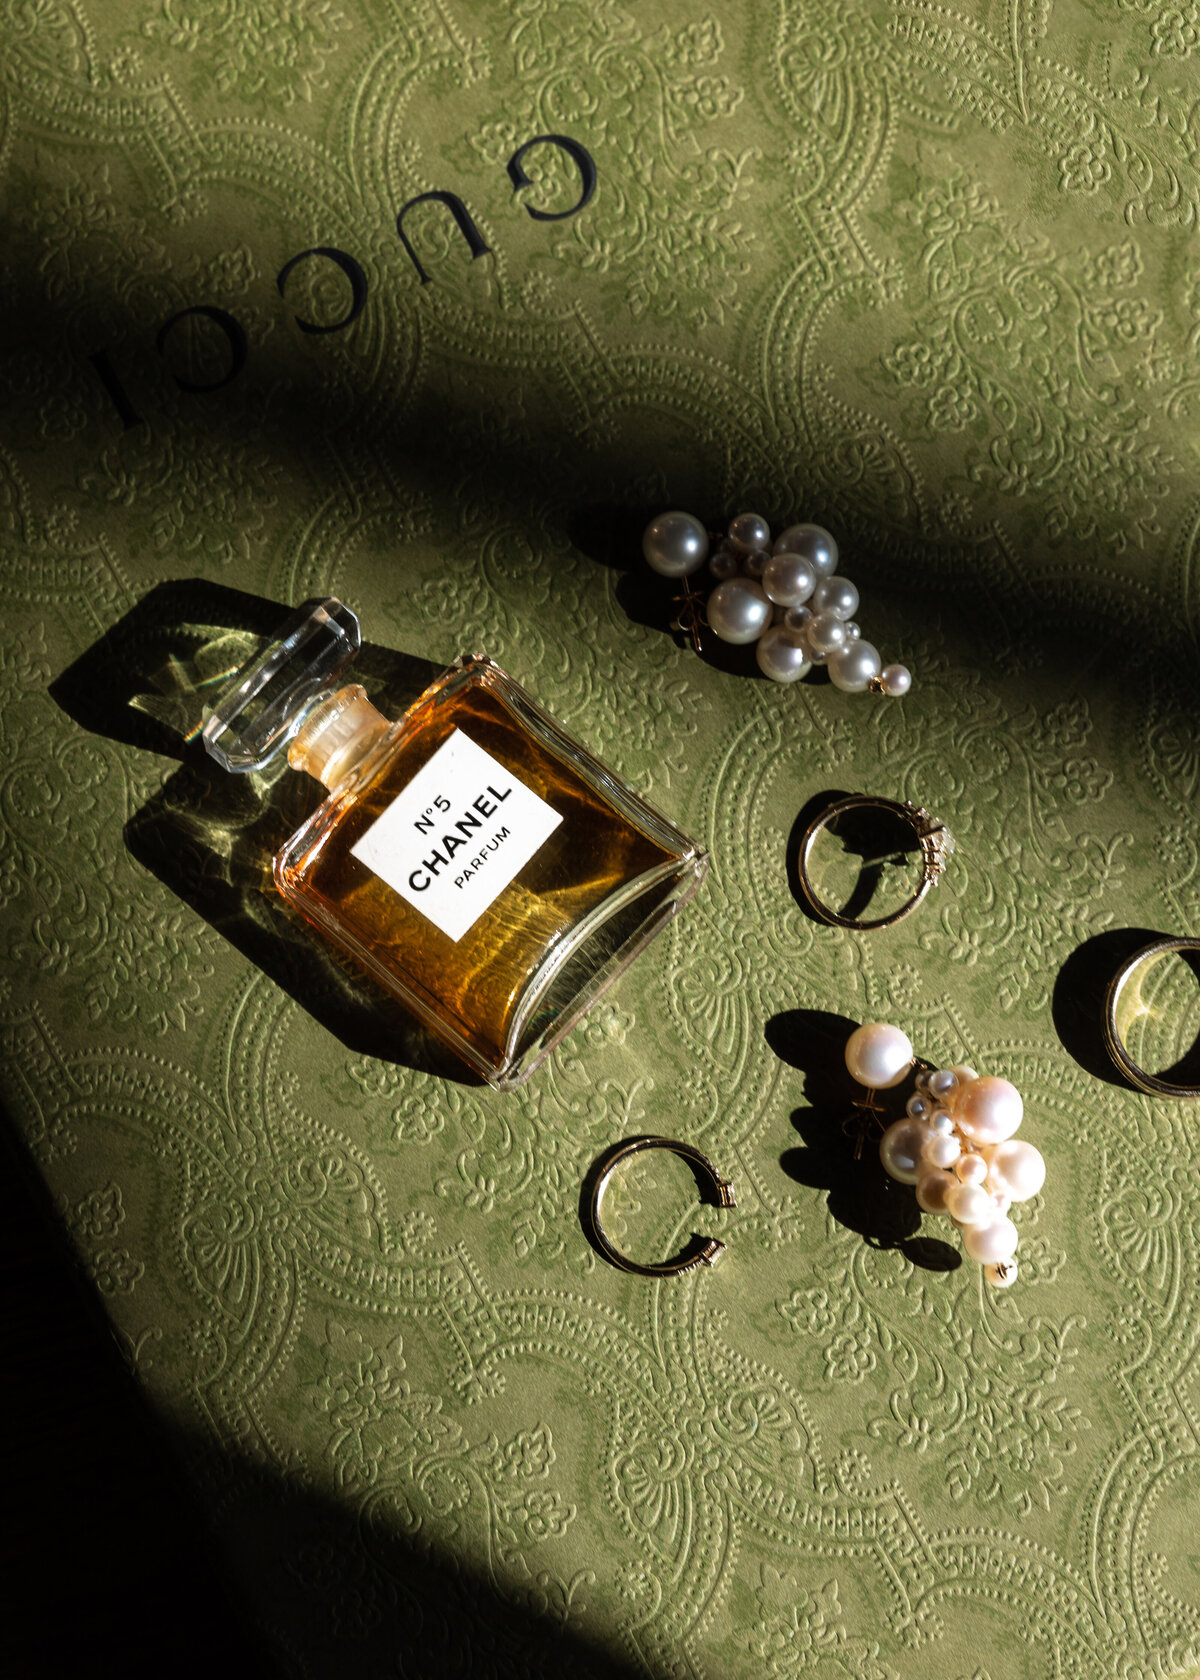 a bottle of perfume, rings and earrings on a green surface